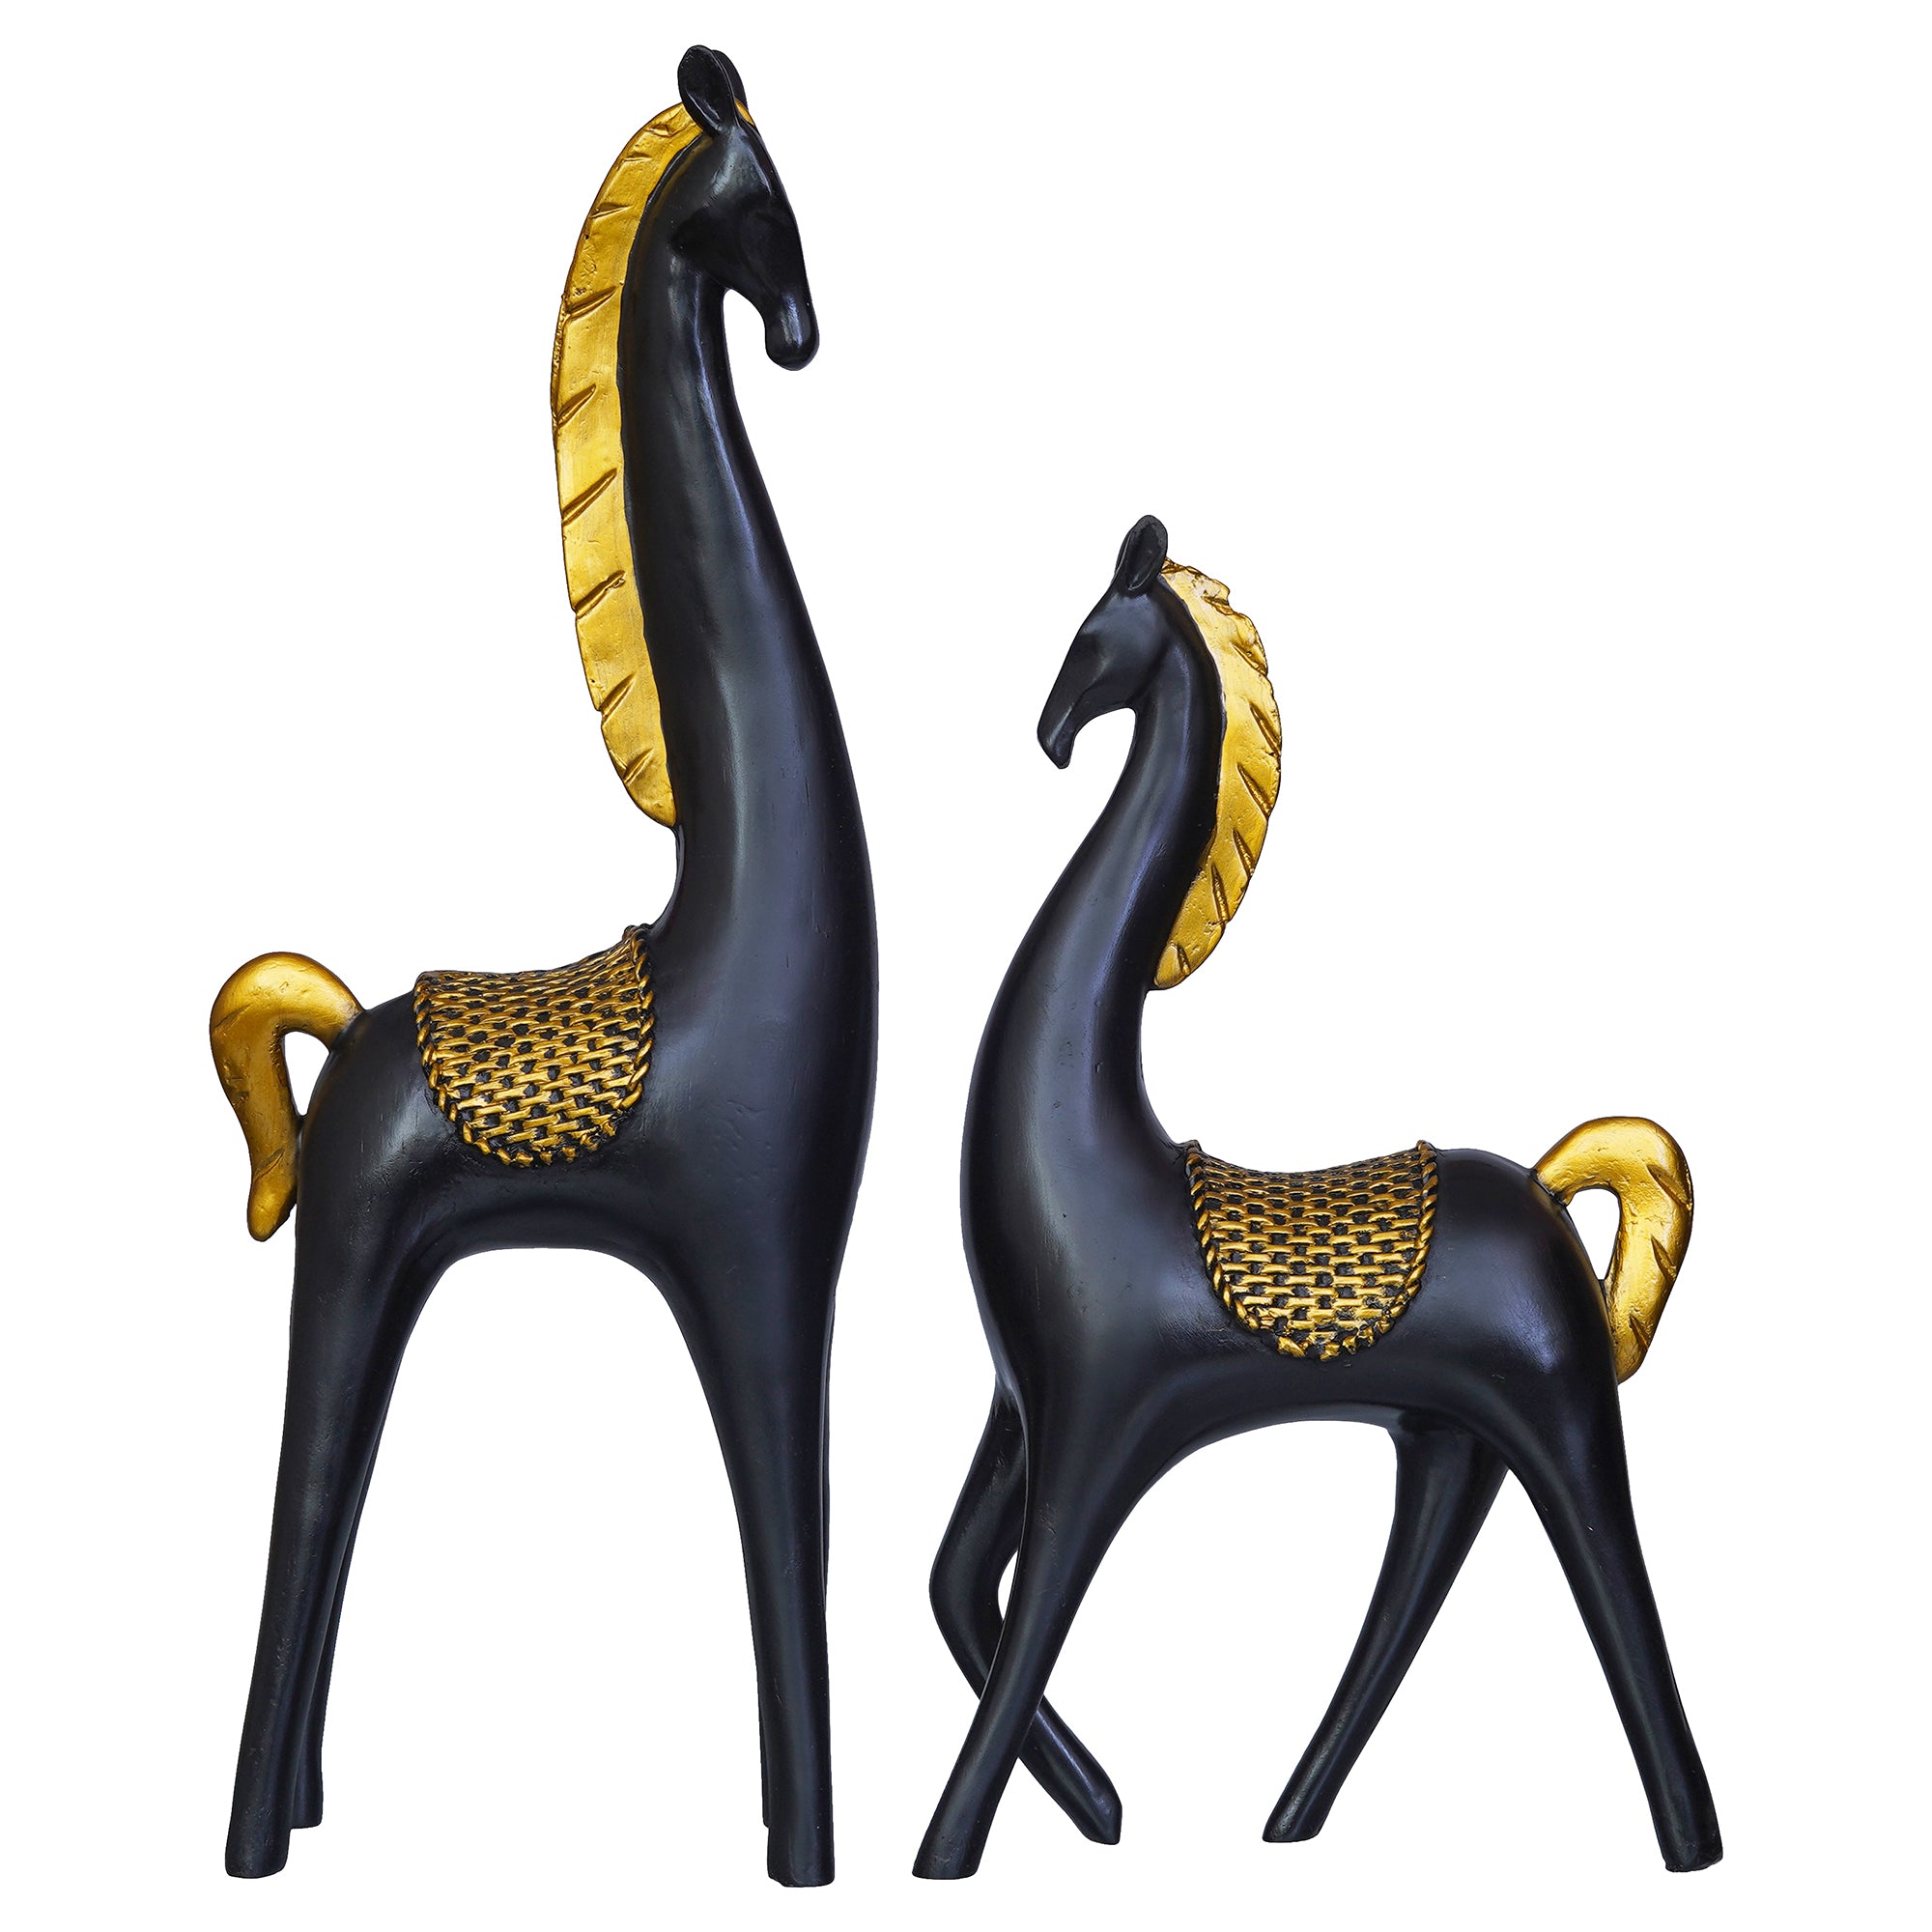 Set of 2 Black Horse Statues with Golden Hair Decorative Animal Figurines 2